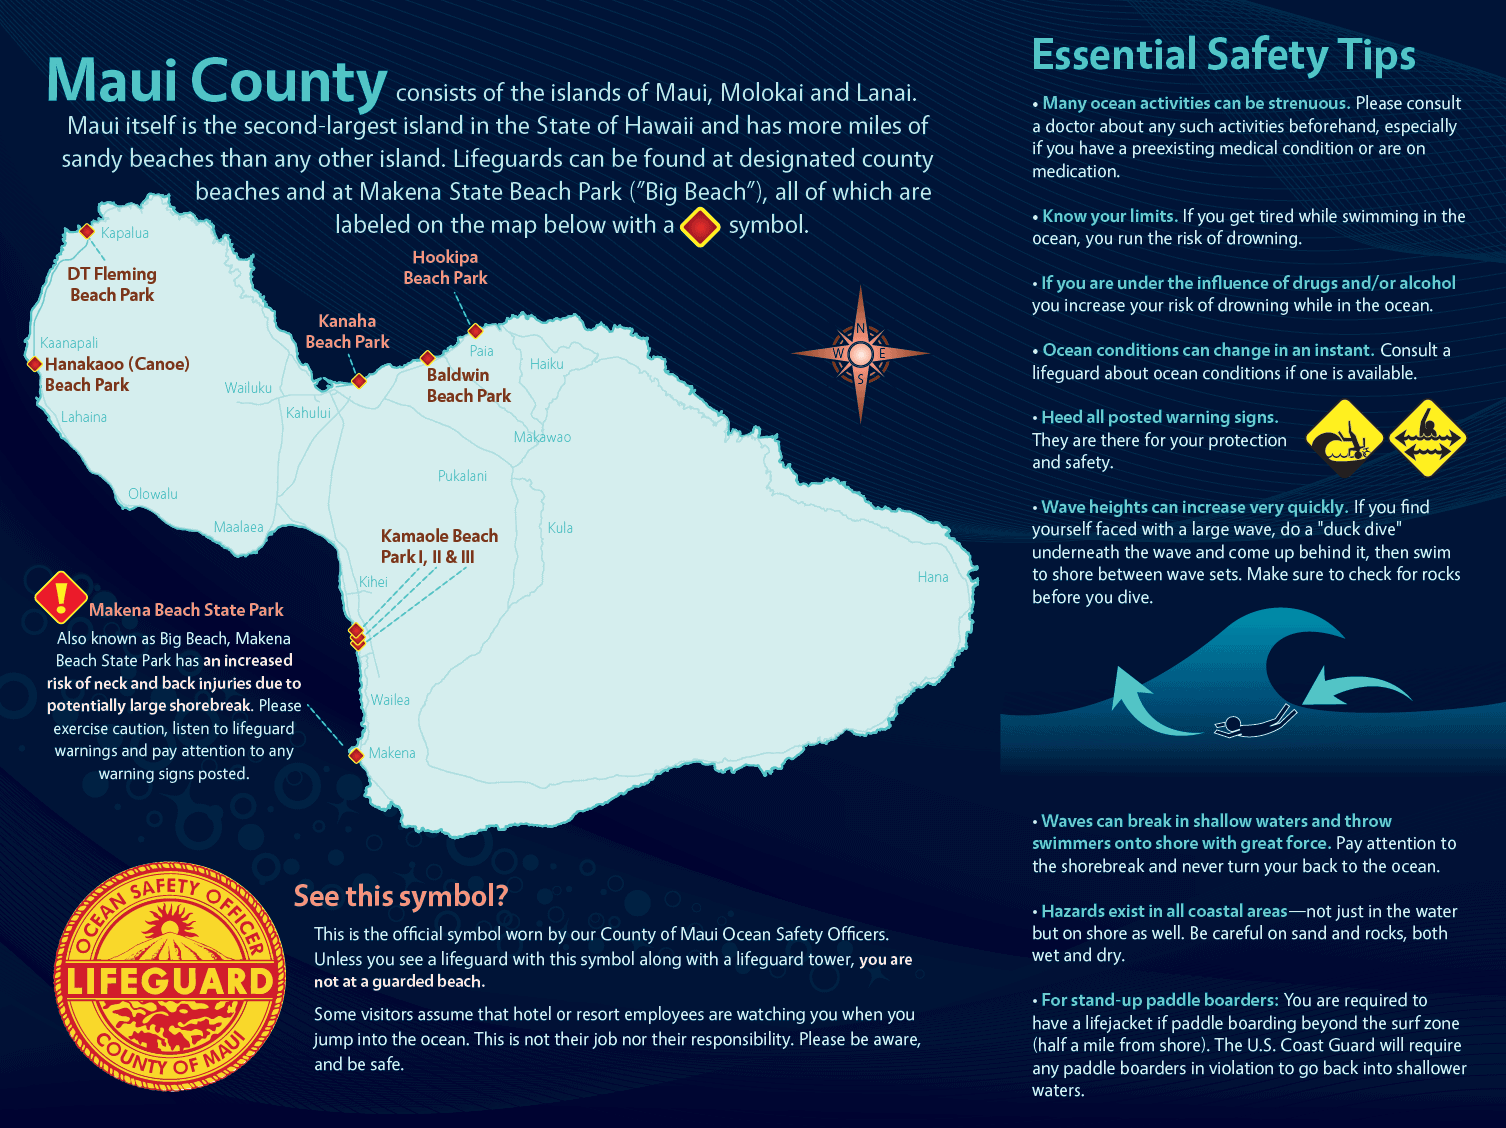 Maui Water safety tips